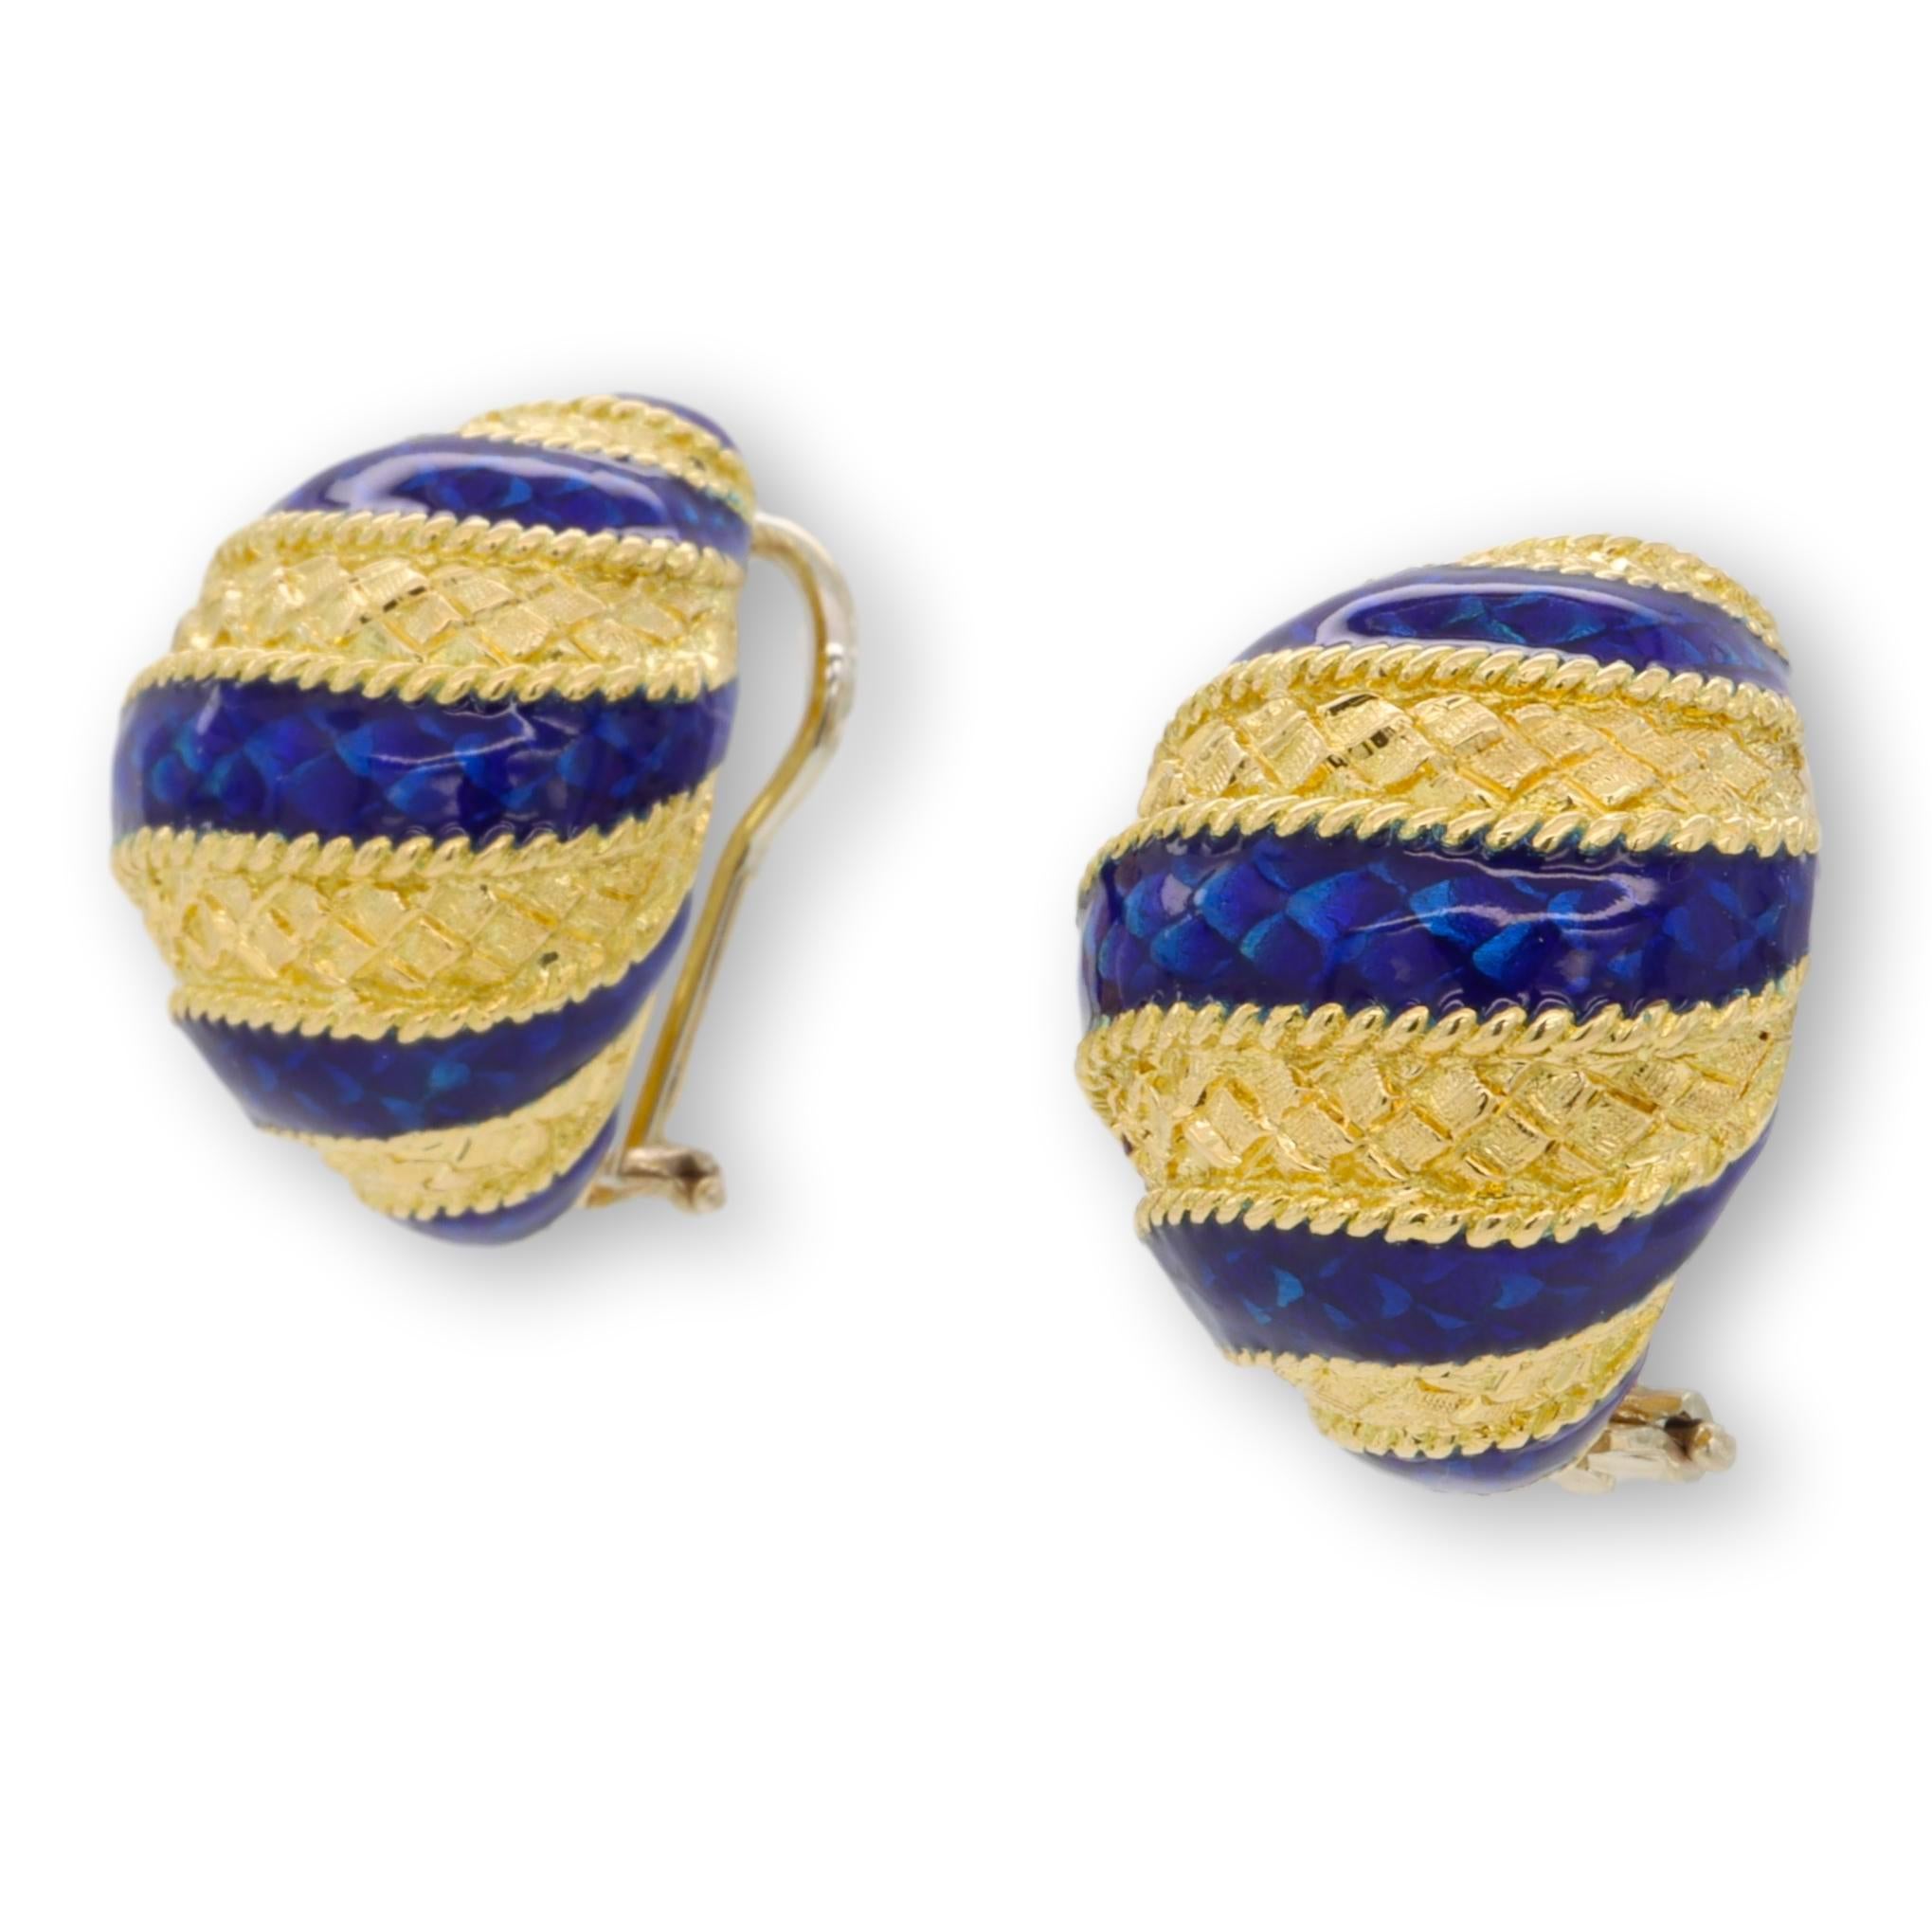 Pair of chunky domed vintage earrings  finely crafted in 18 karat yellow gold featuring a ribbed lattice textured design complemented by smooth blue enamel stripes inside knotted gold details. Earrings have large omega back closures and posts. The